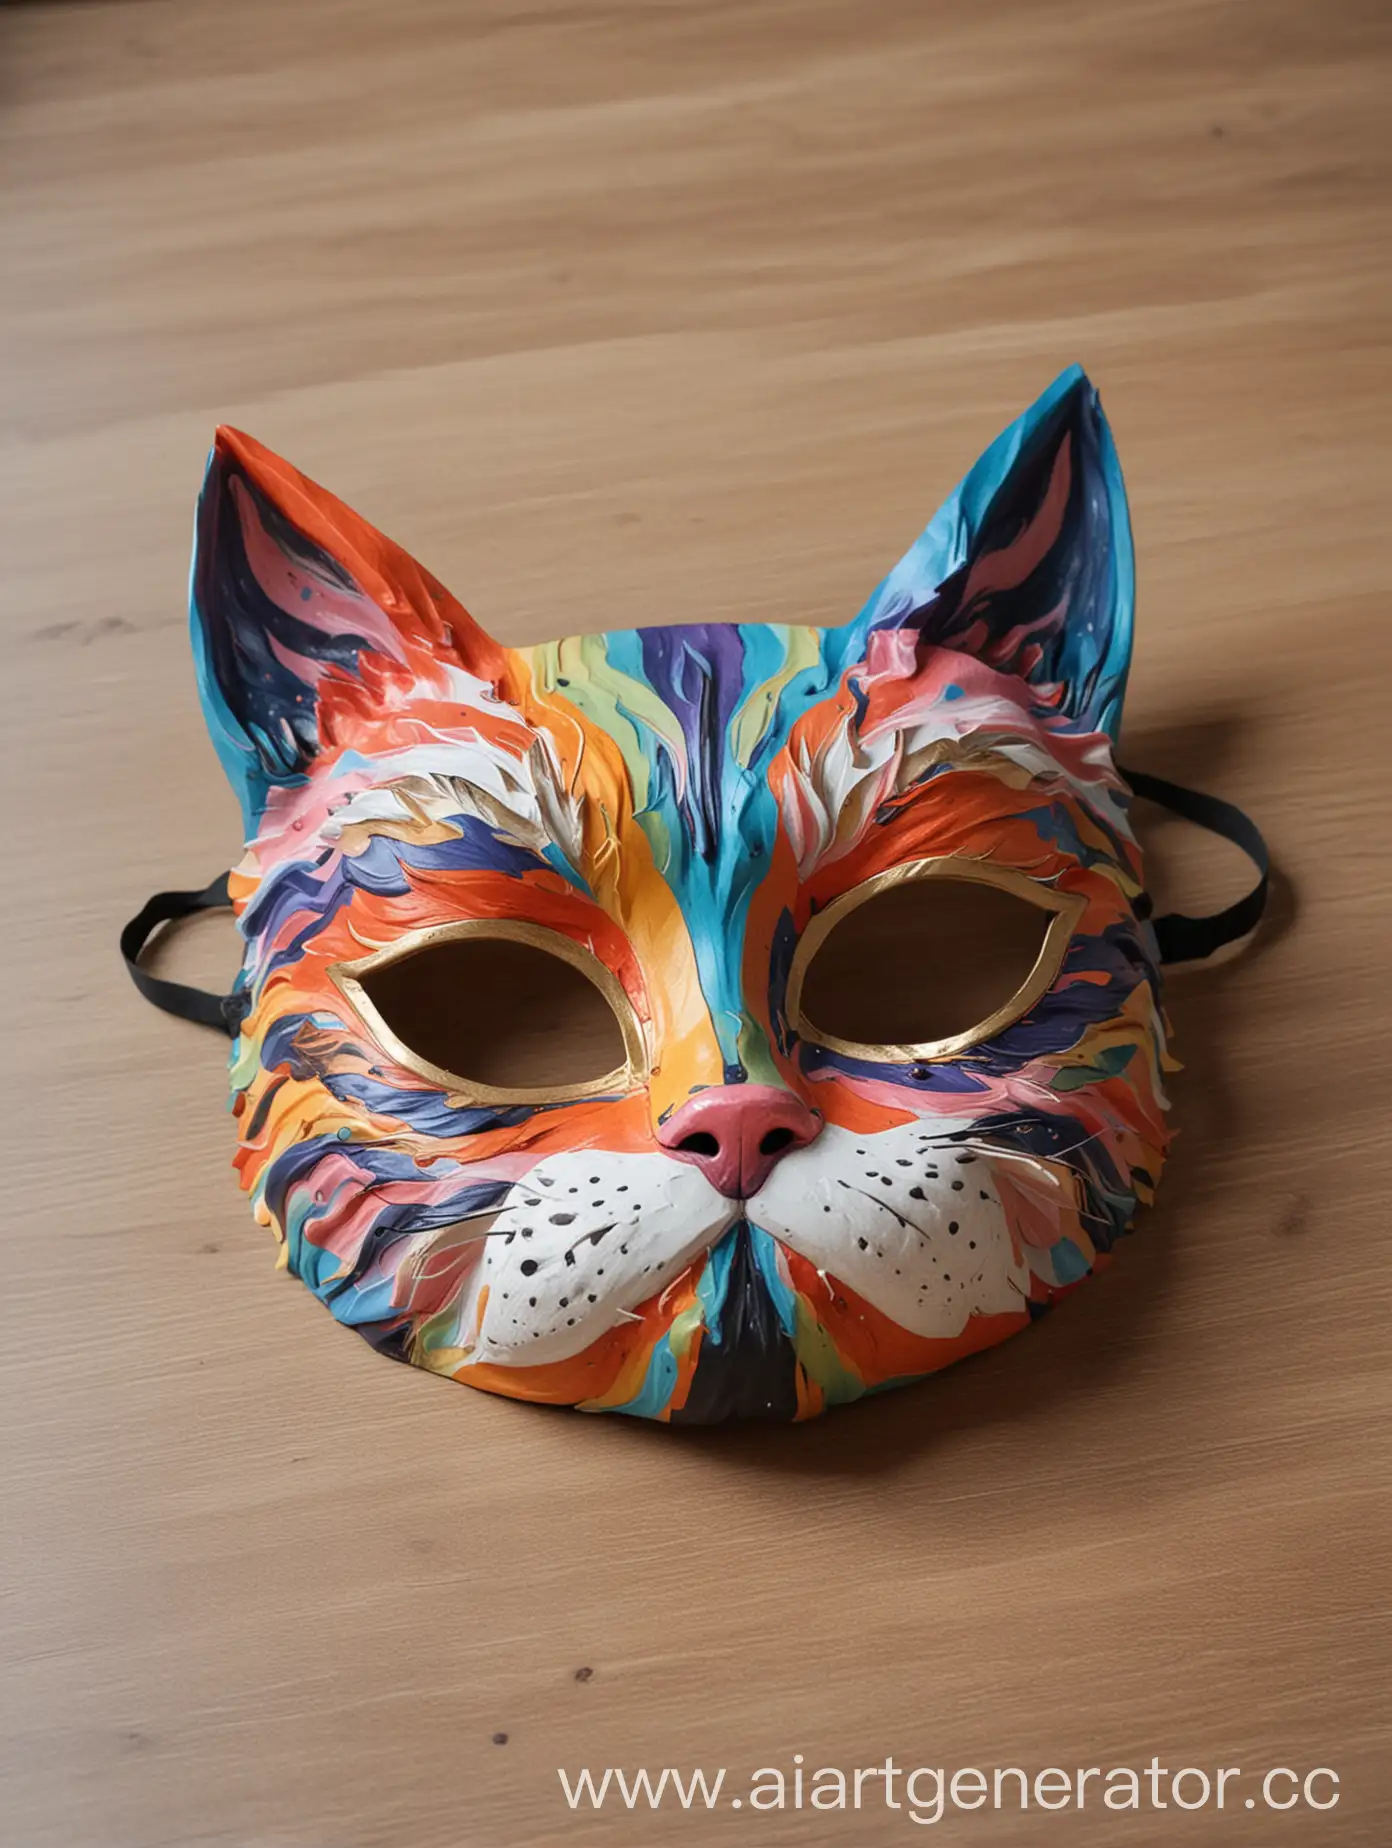 Colorful-Cat-Mask-Resting-on-Table